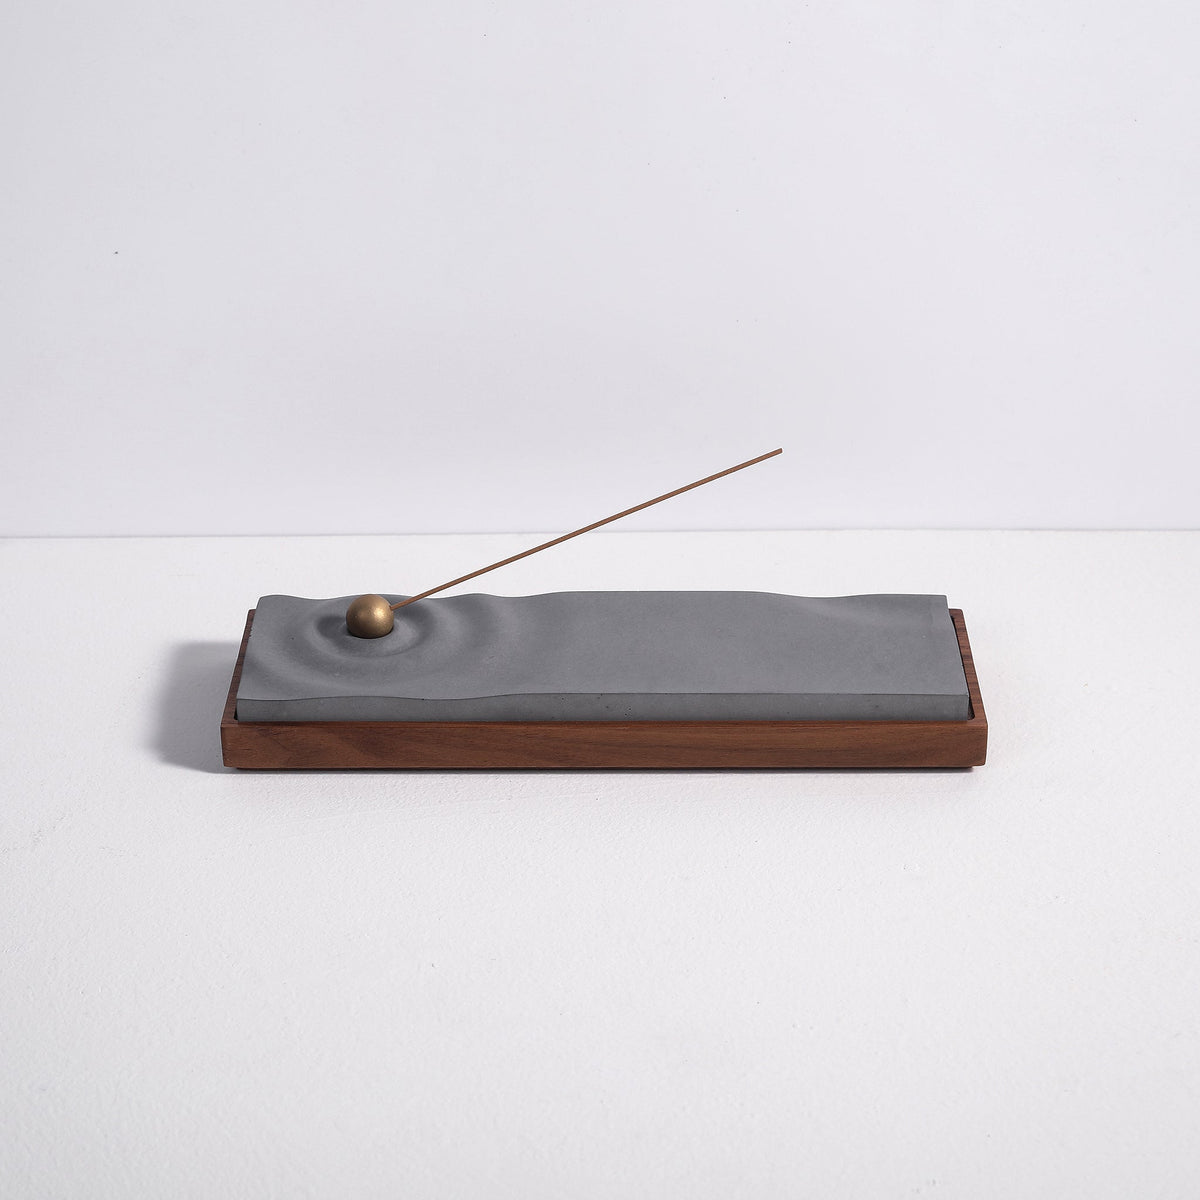 Concrete ripple incense burner with walnut base by Kin Objects